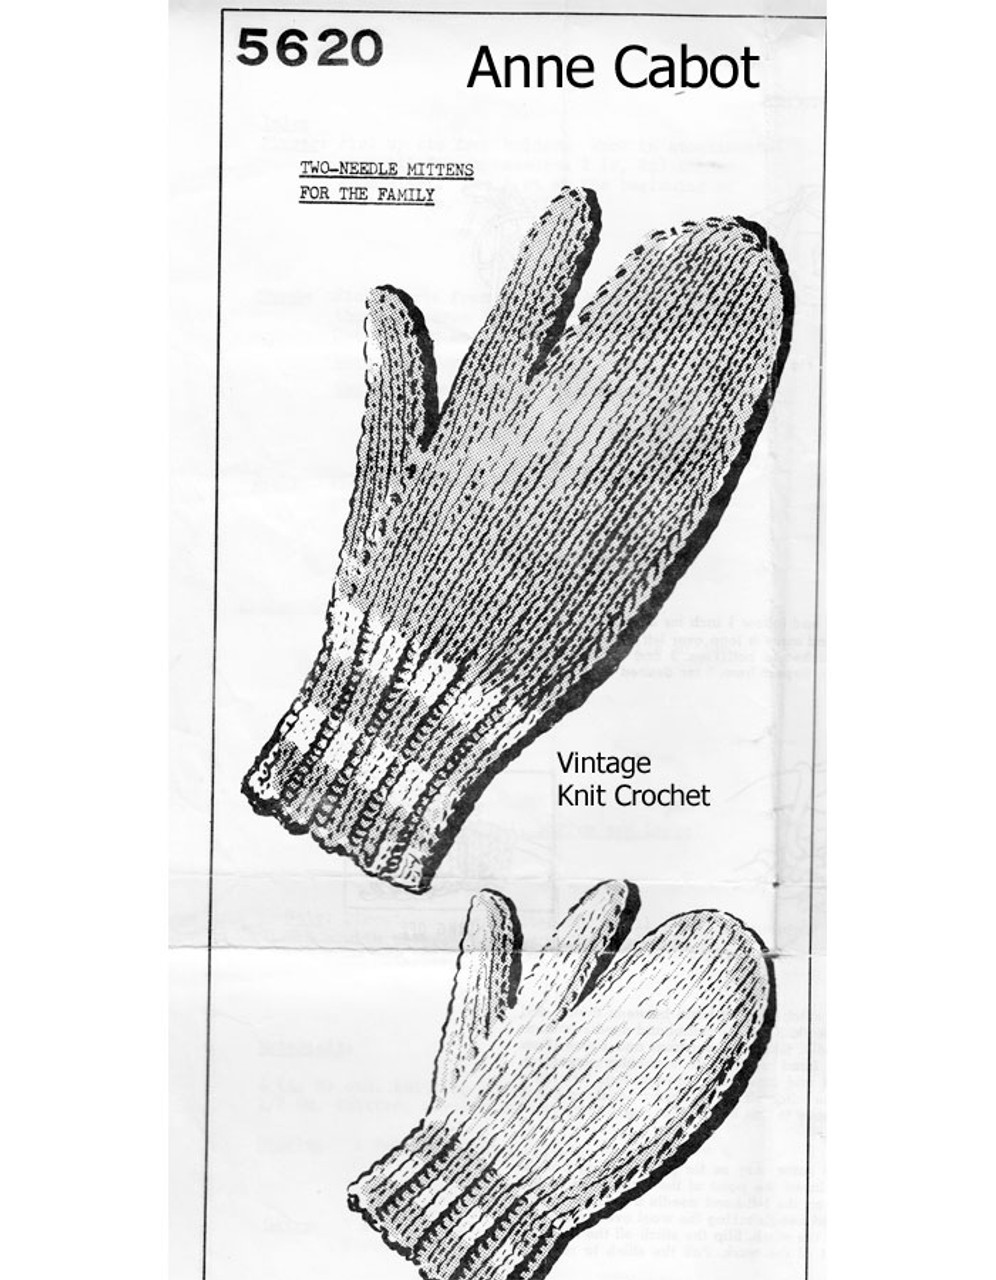 Knitted Family Mittens Pattern, two needle, Anne Cabot 5620